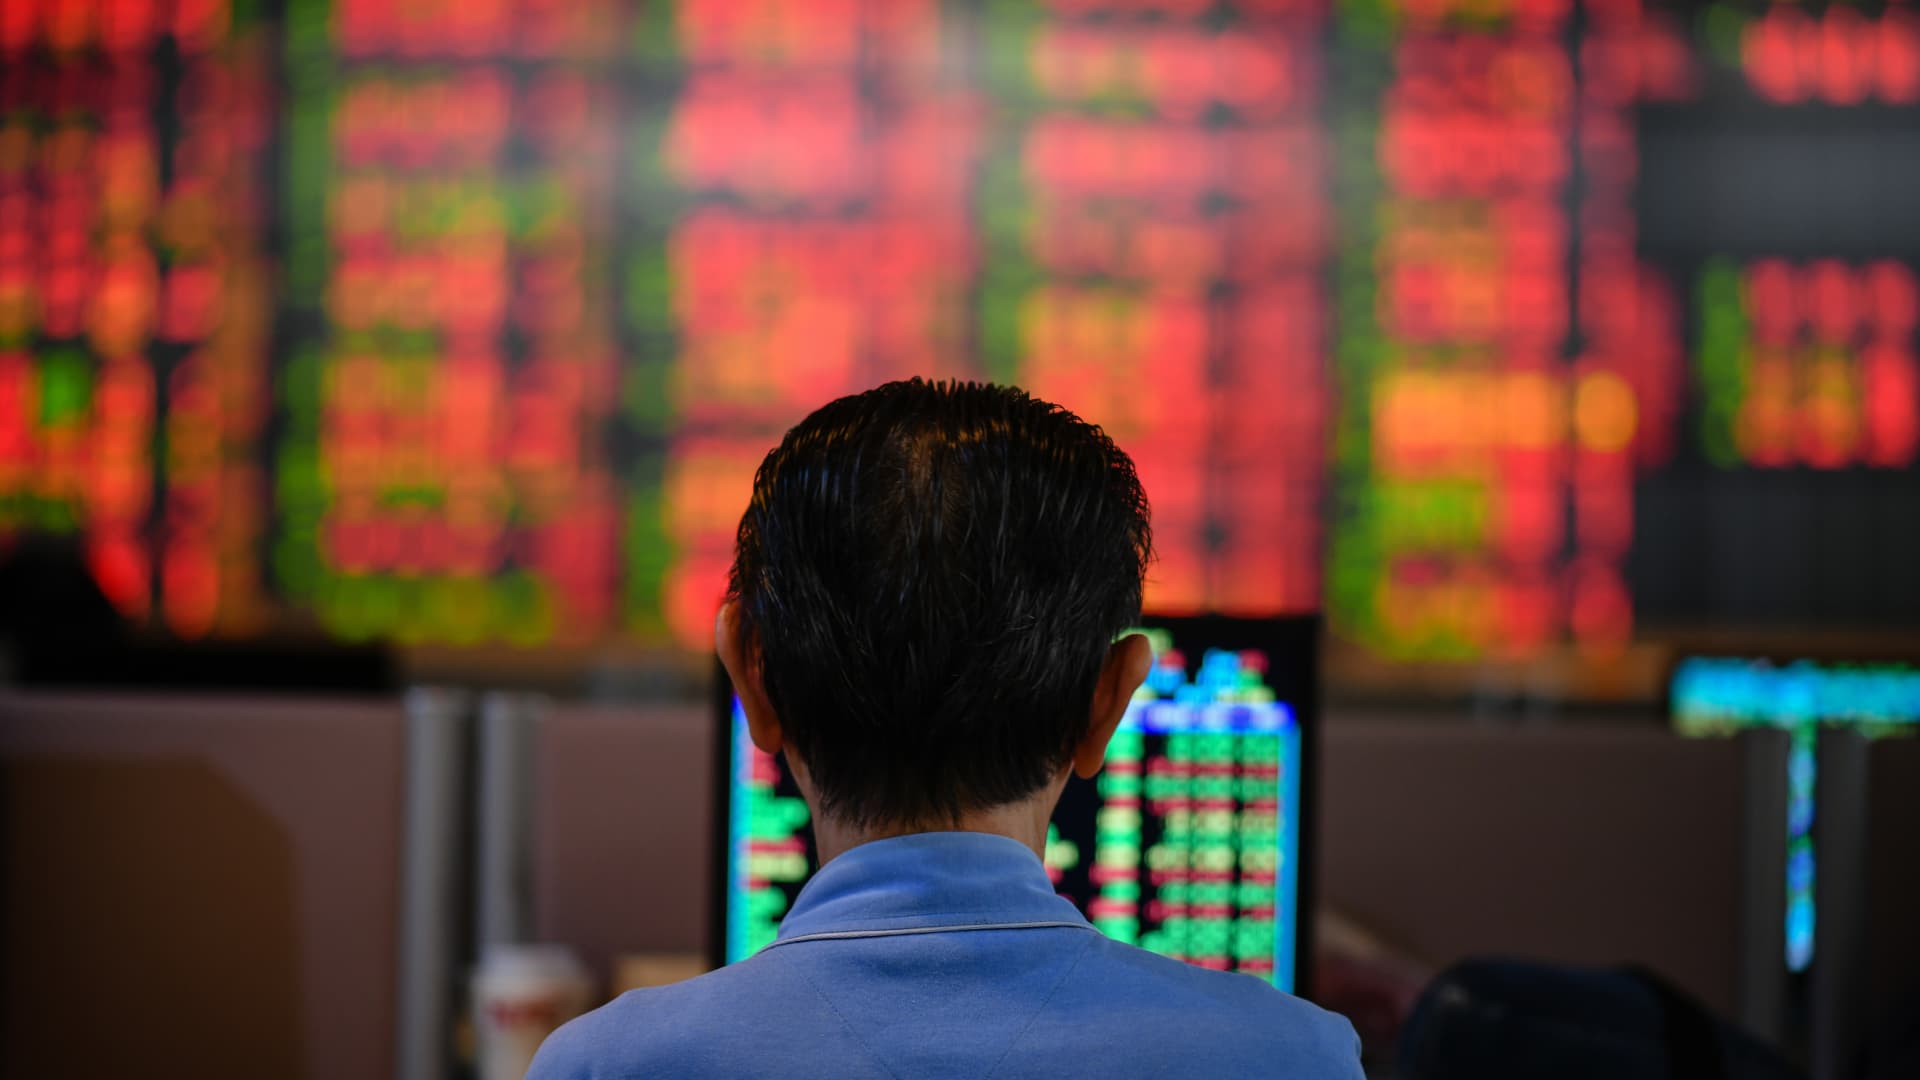 Hong Kong stocks lead gains in Asia after soft U.S. inflation, better-than-expected China data